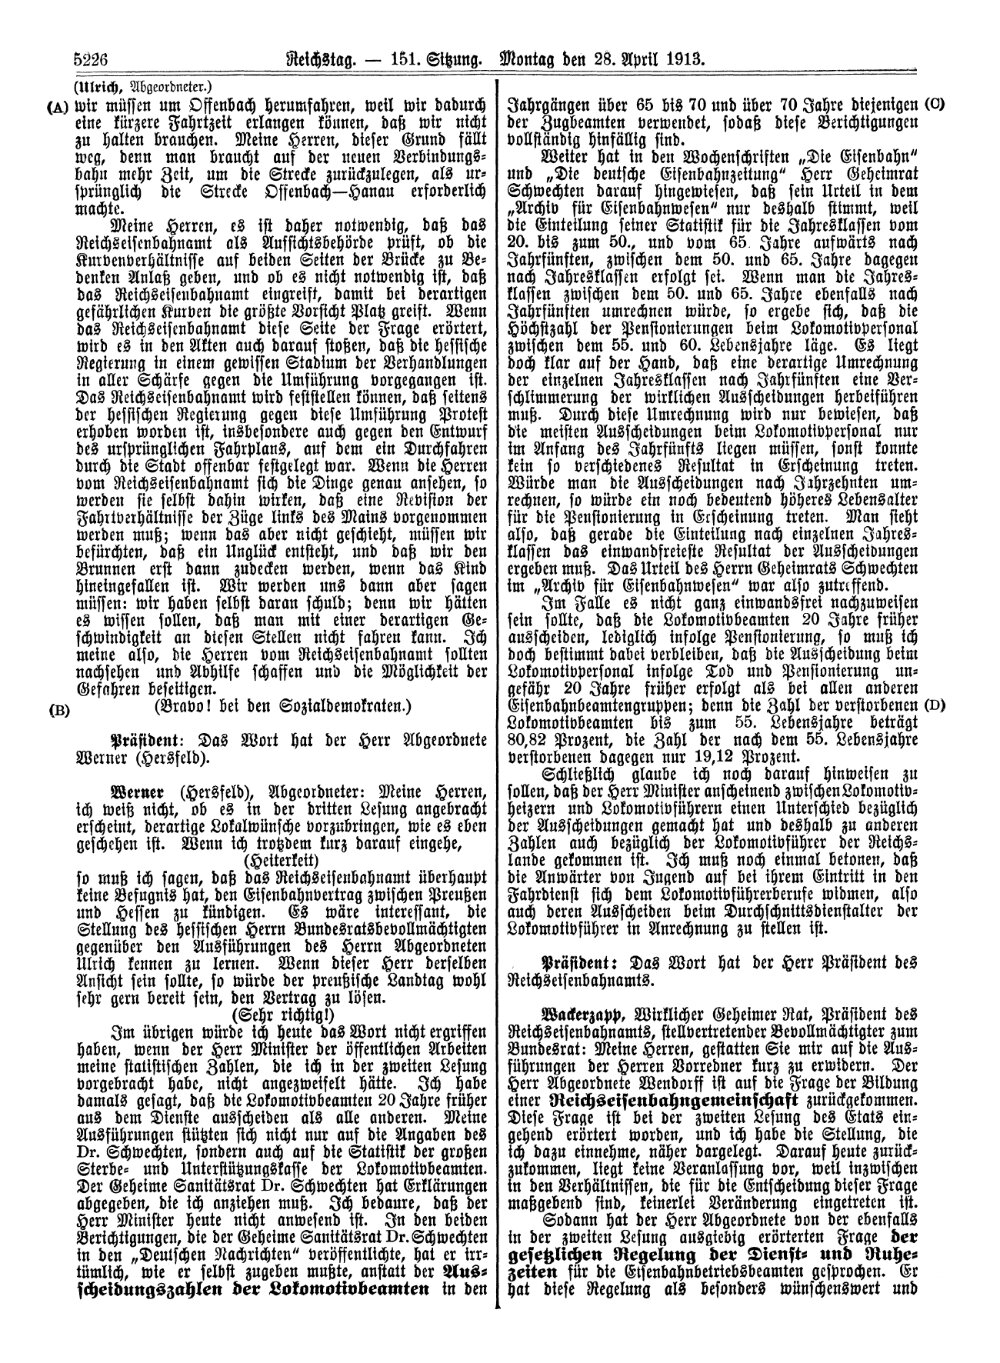 Scan of page 5226